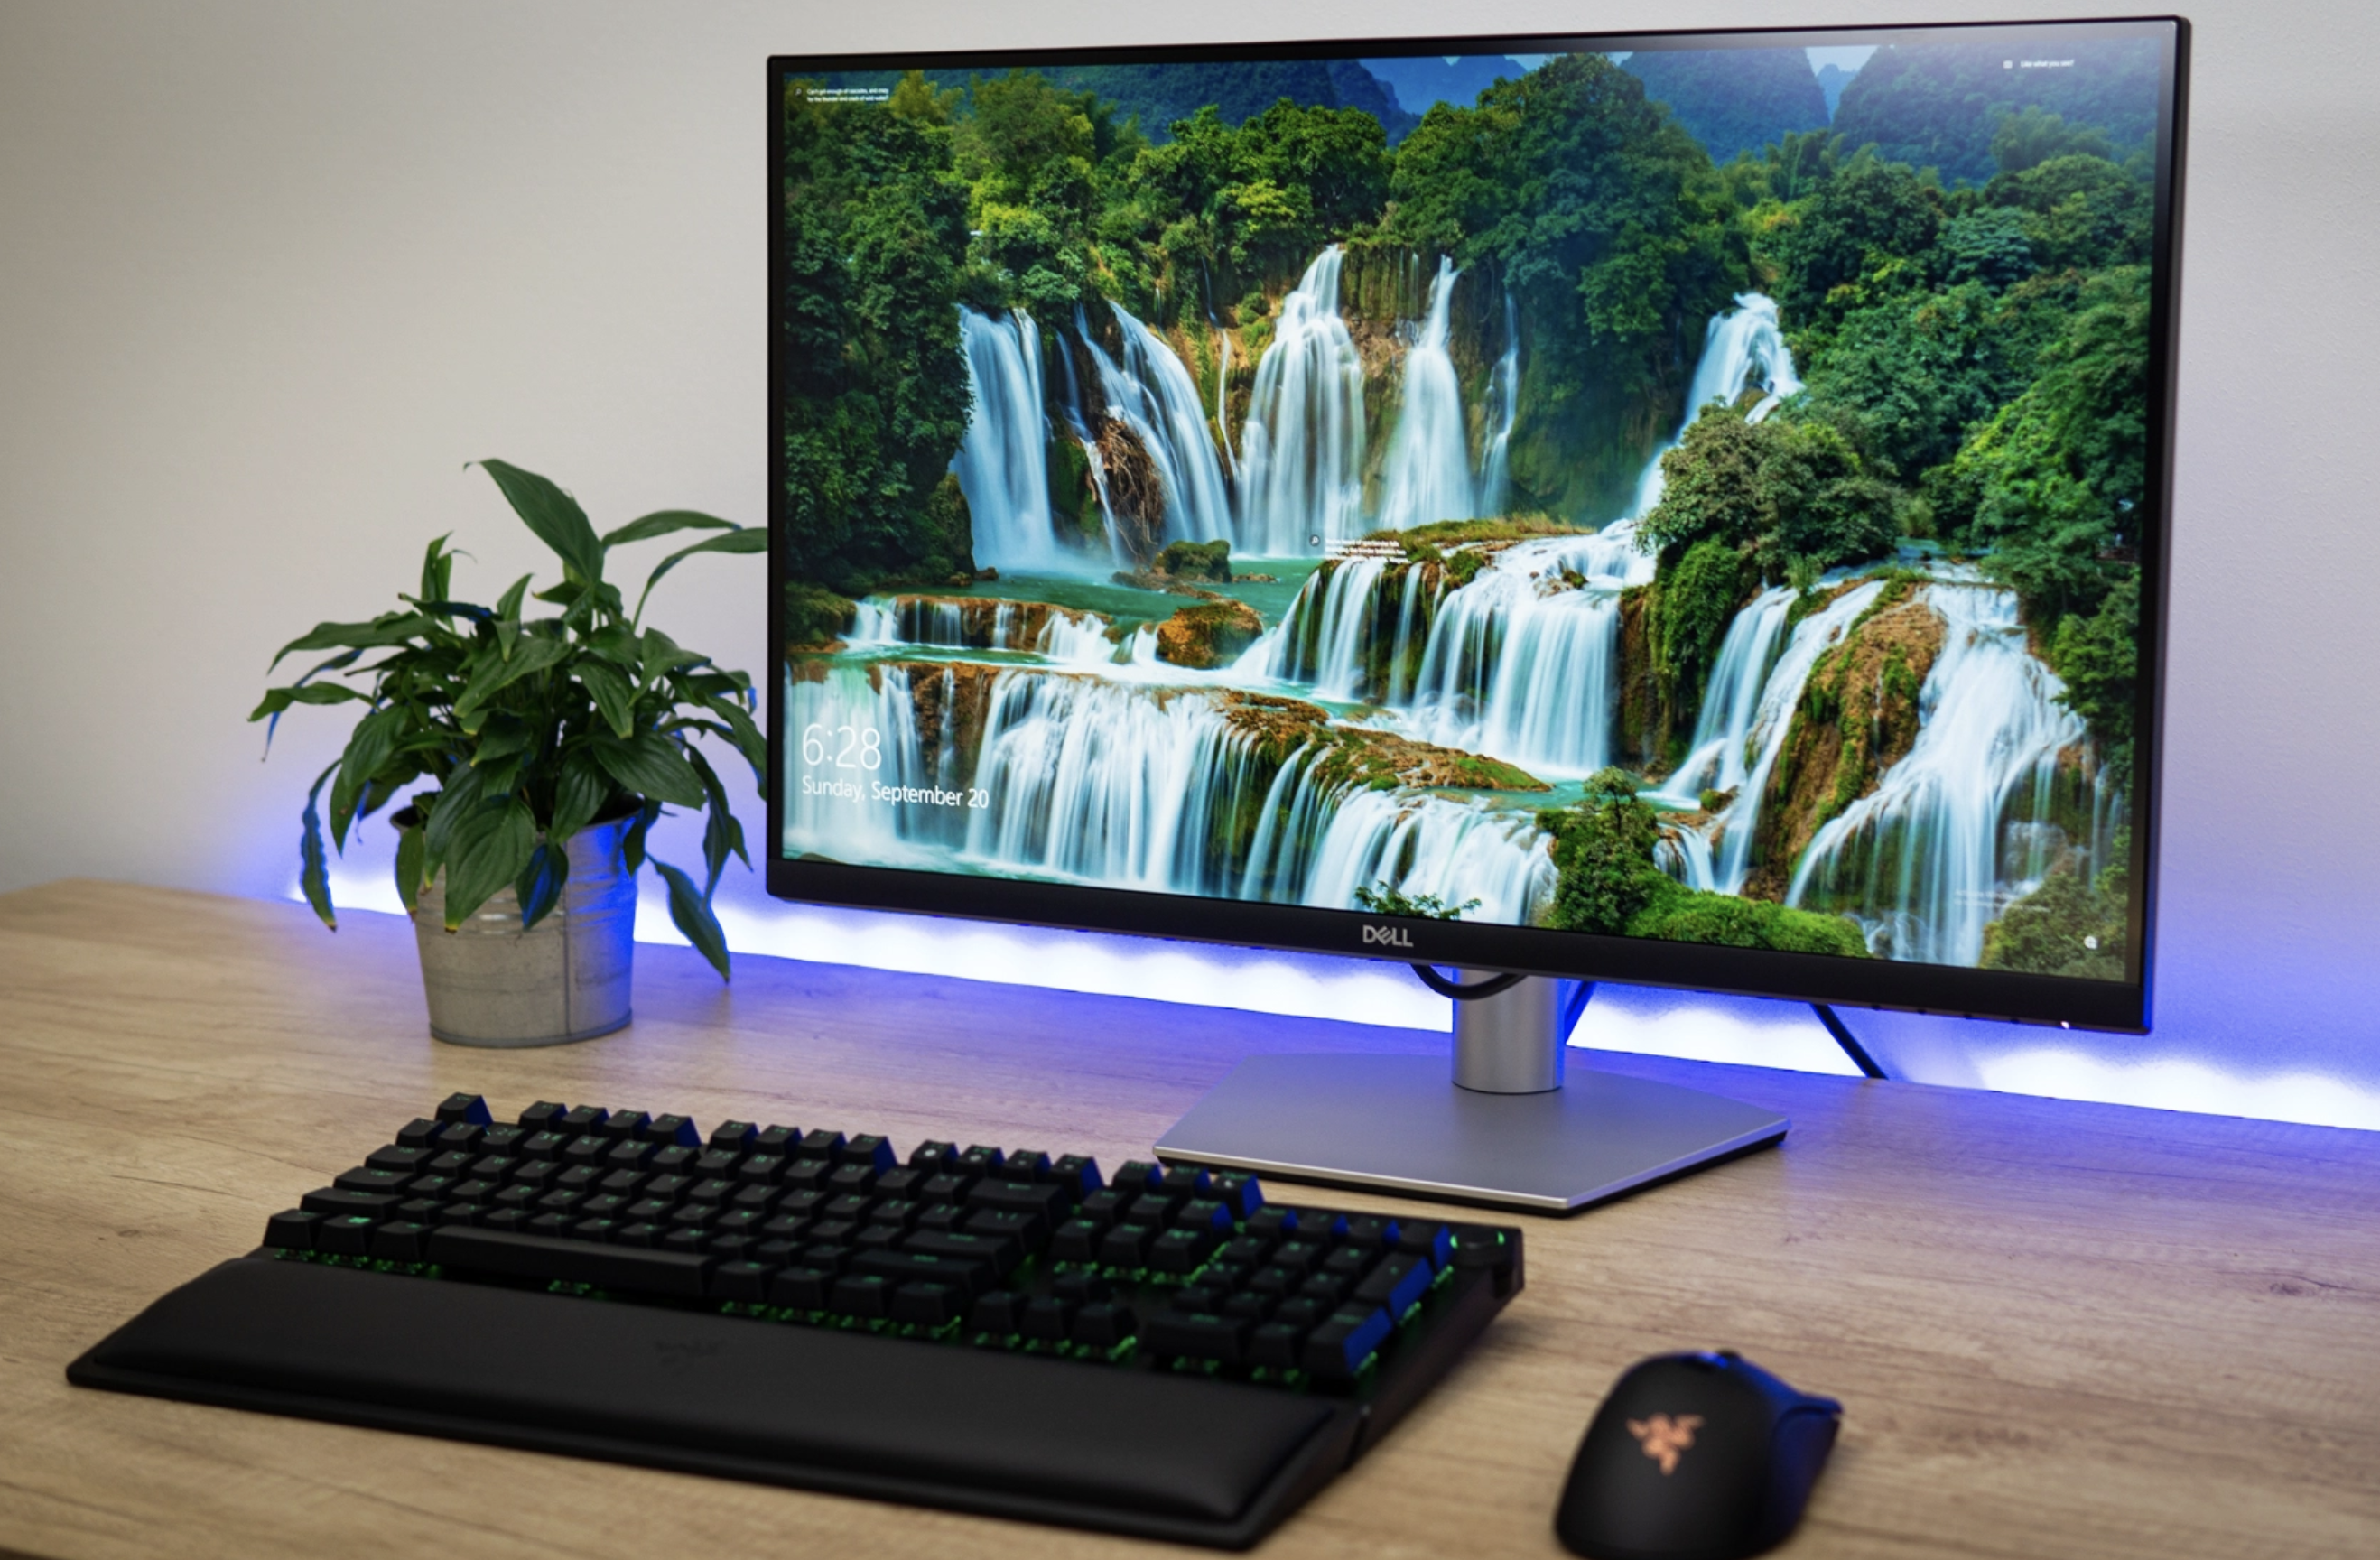 The 27-inch Dell S2721QS 4K monitor on a table.